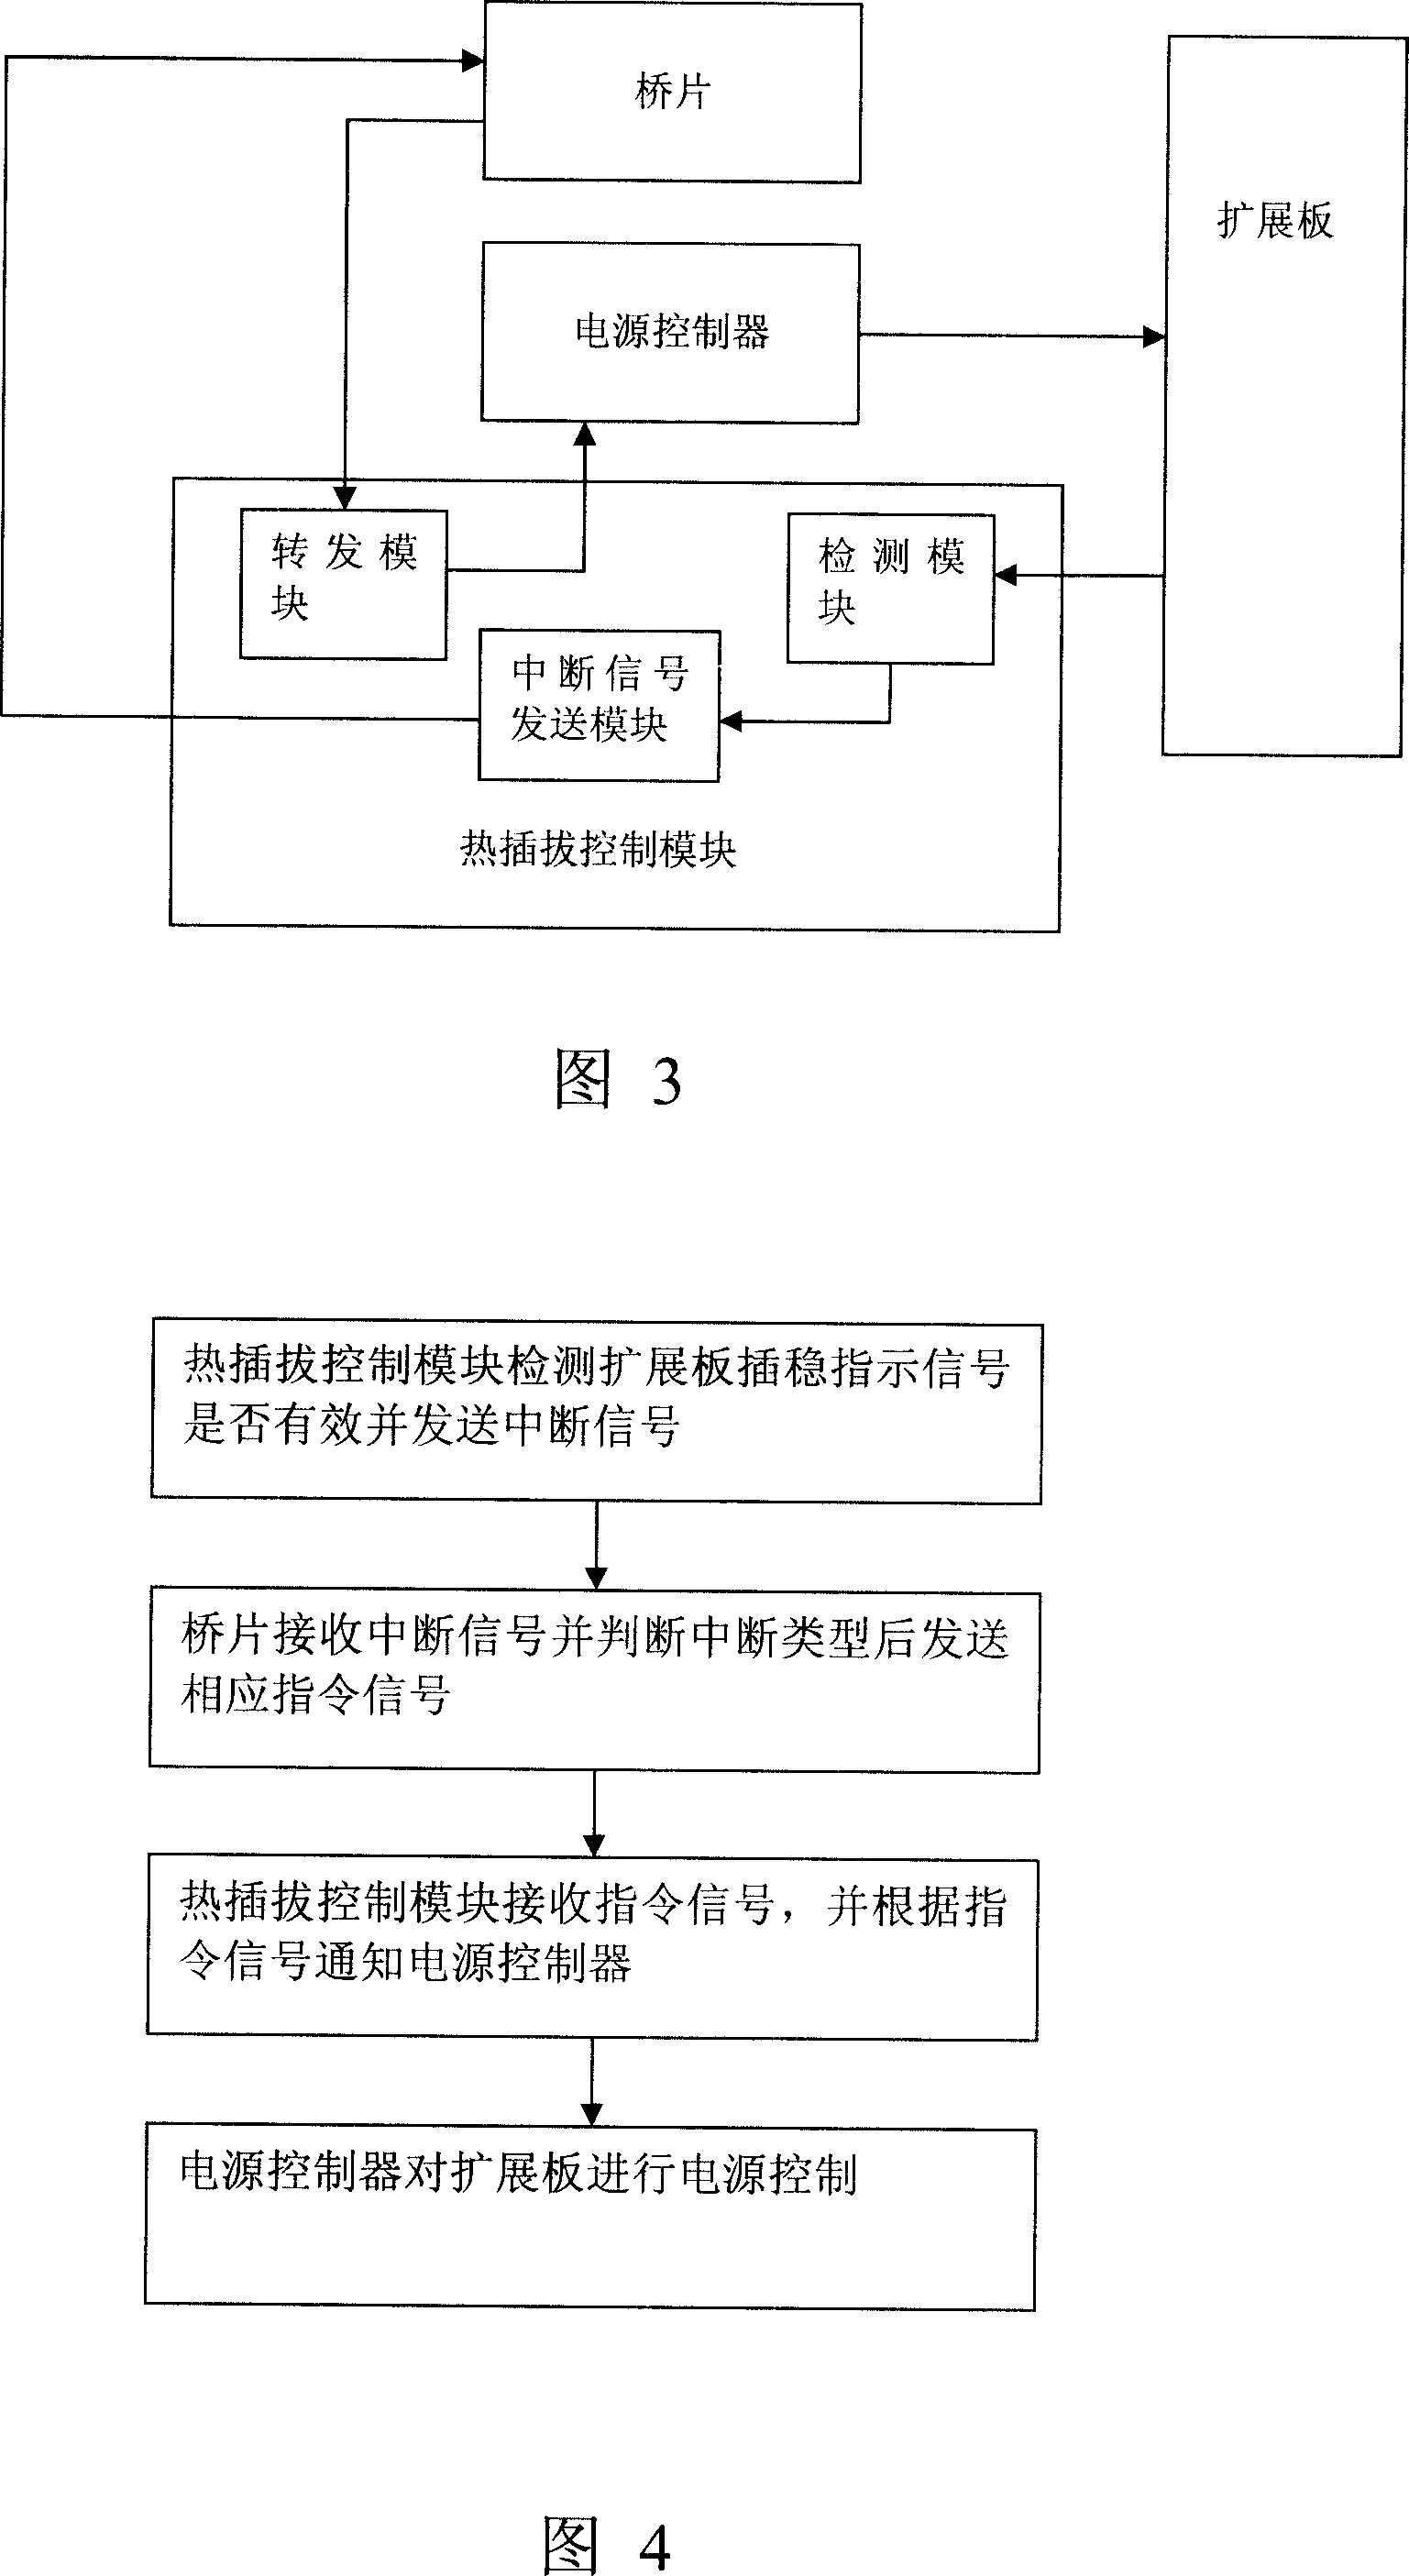 Thermal-plug controller and controlling method